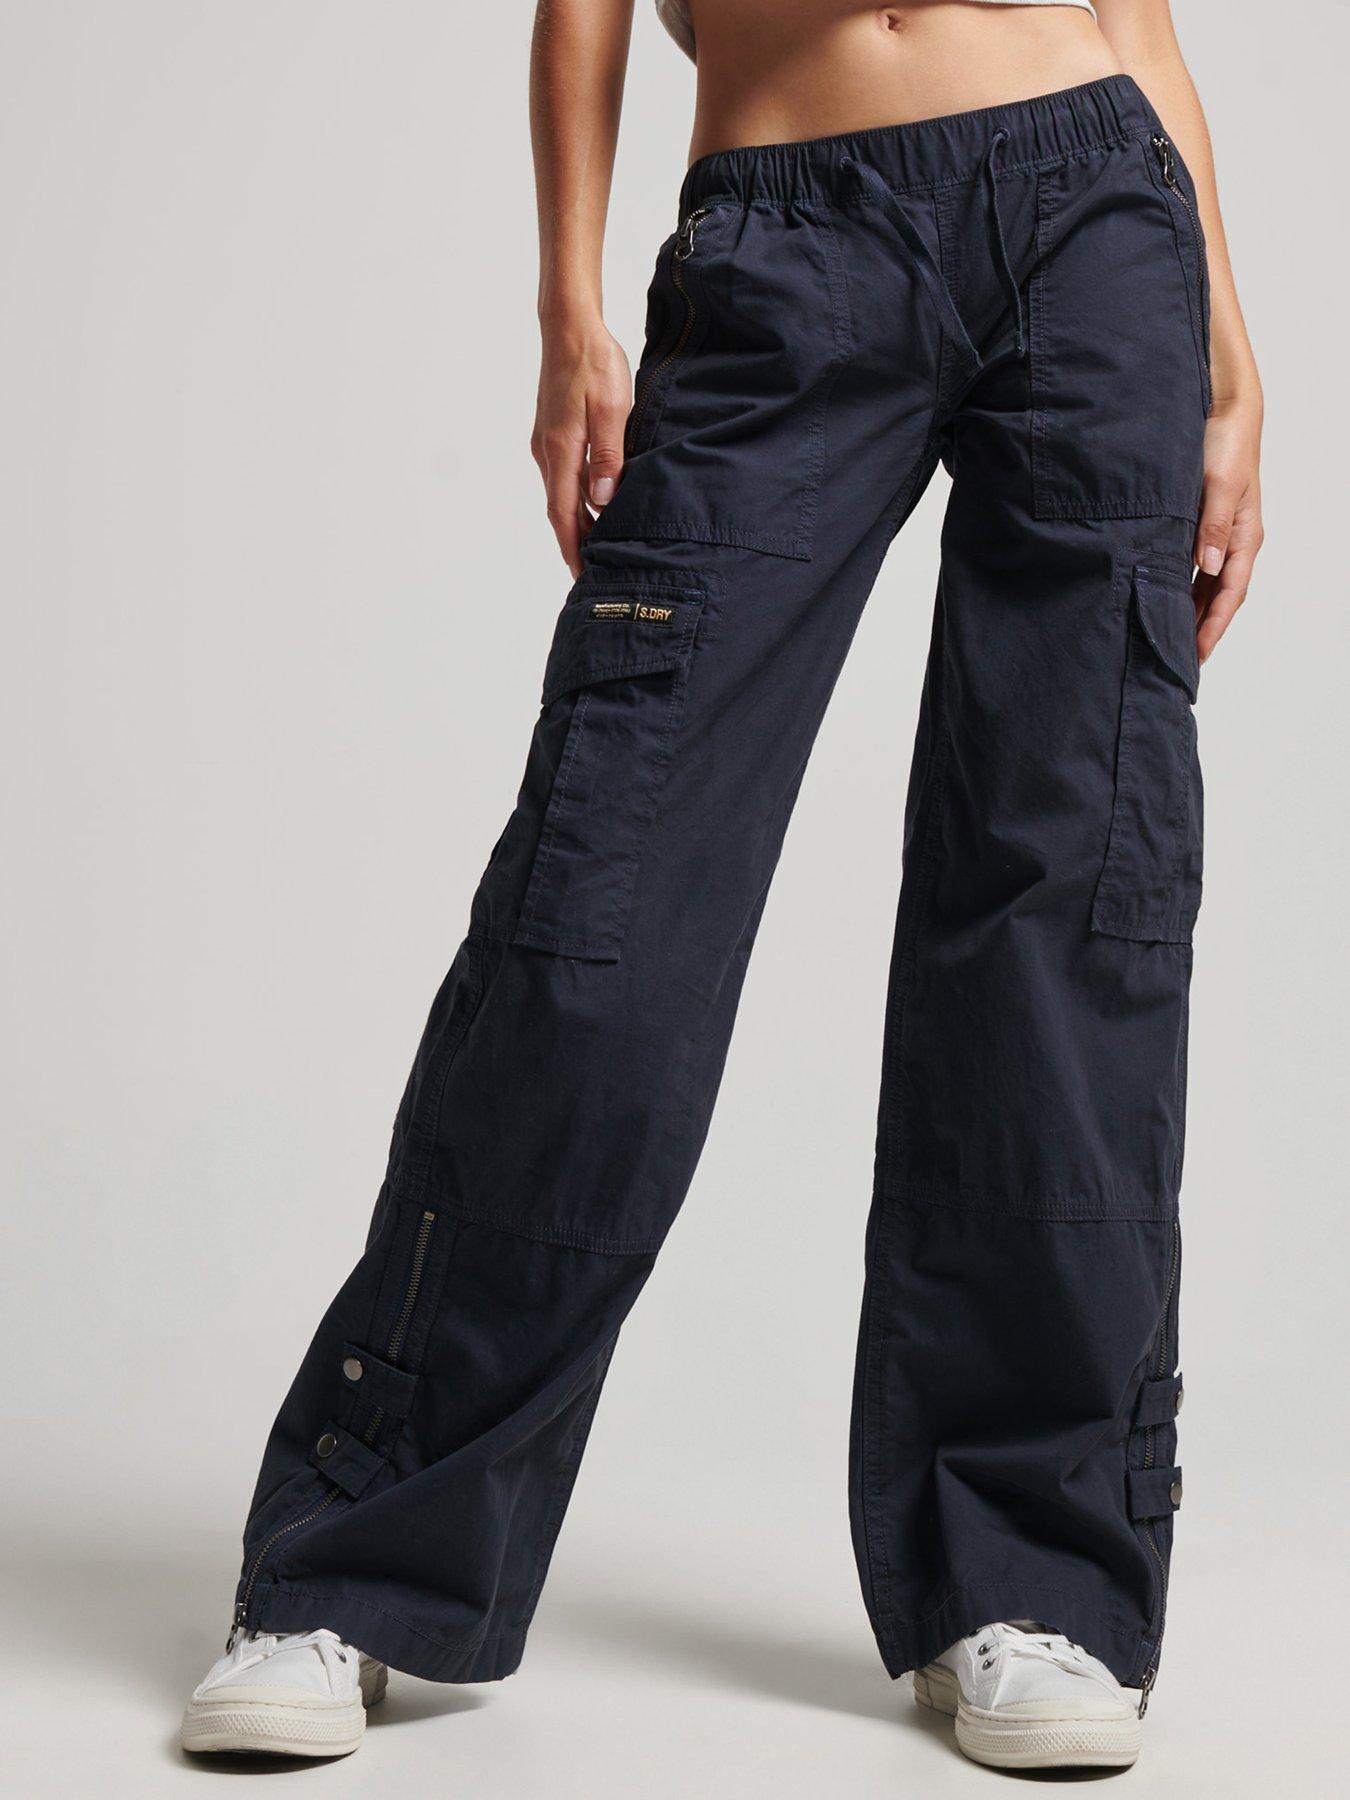 Find Stylish Women's Navy Trousers at